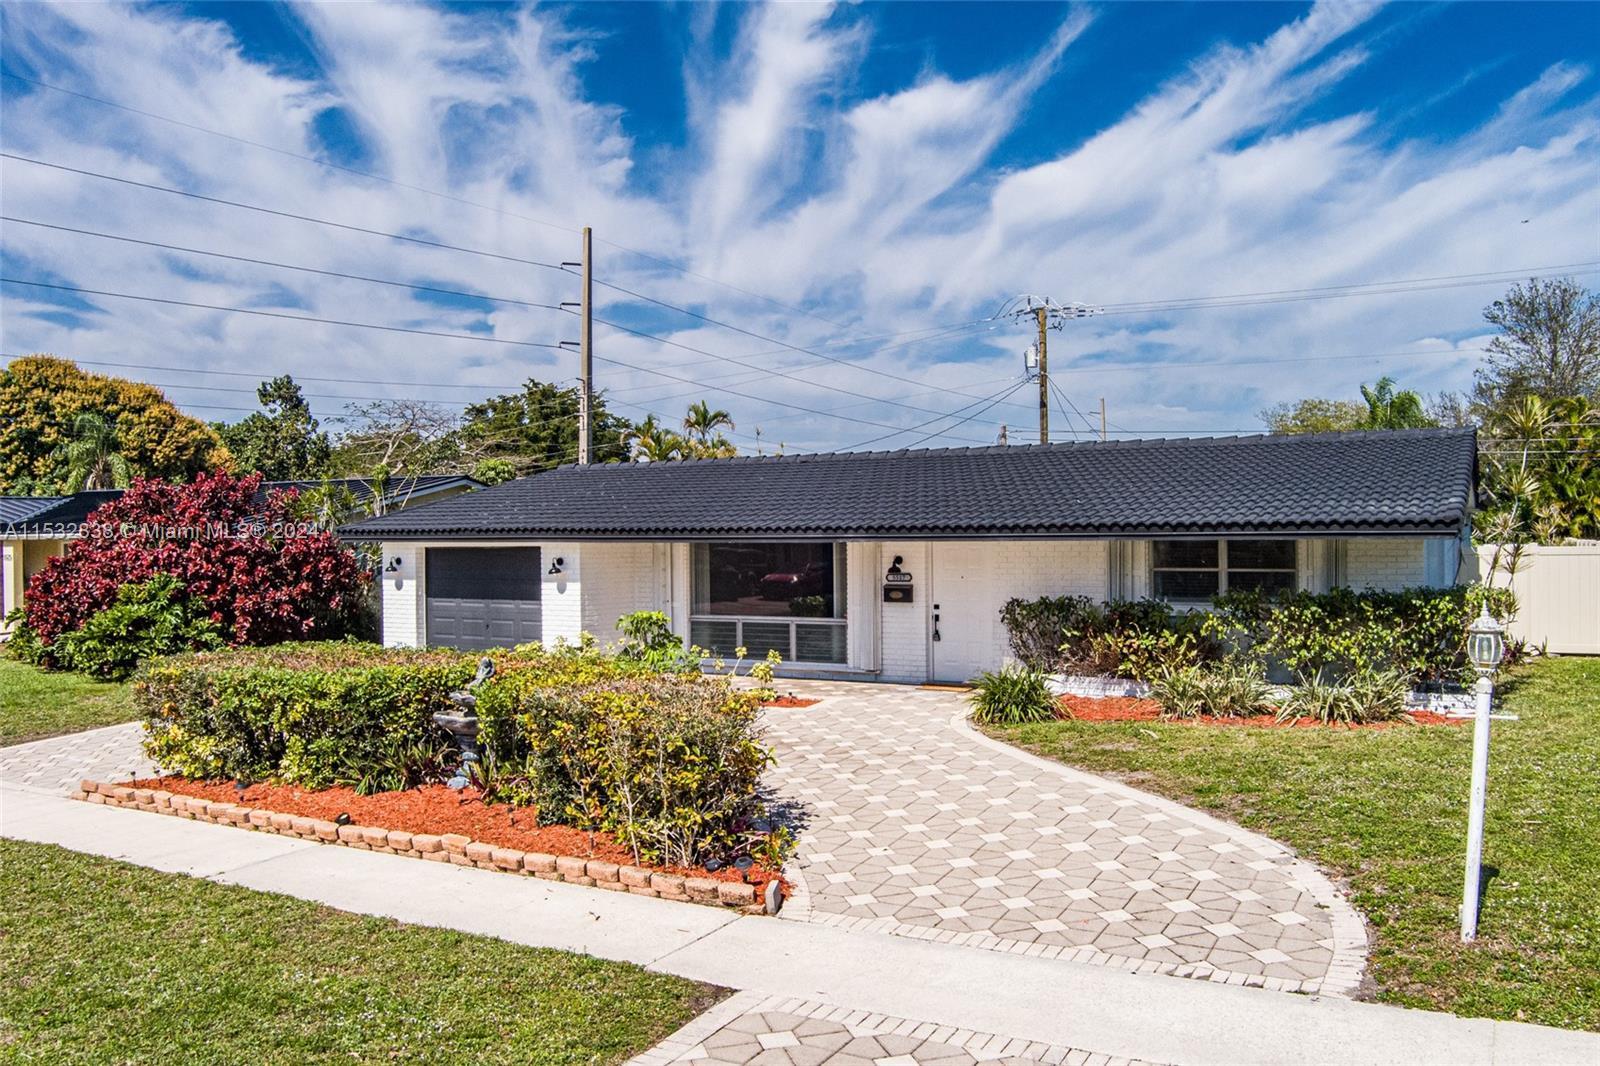 Photo of 5517 Jefferson St in Hollywood, FL